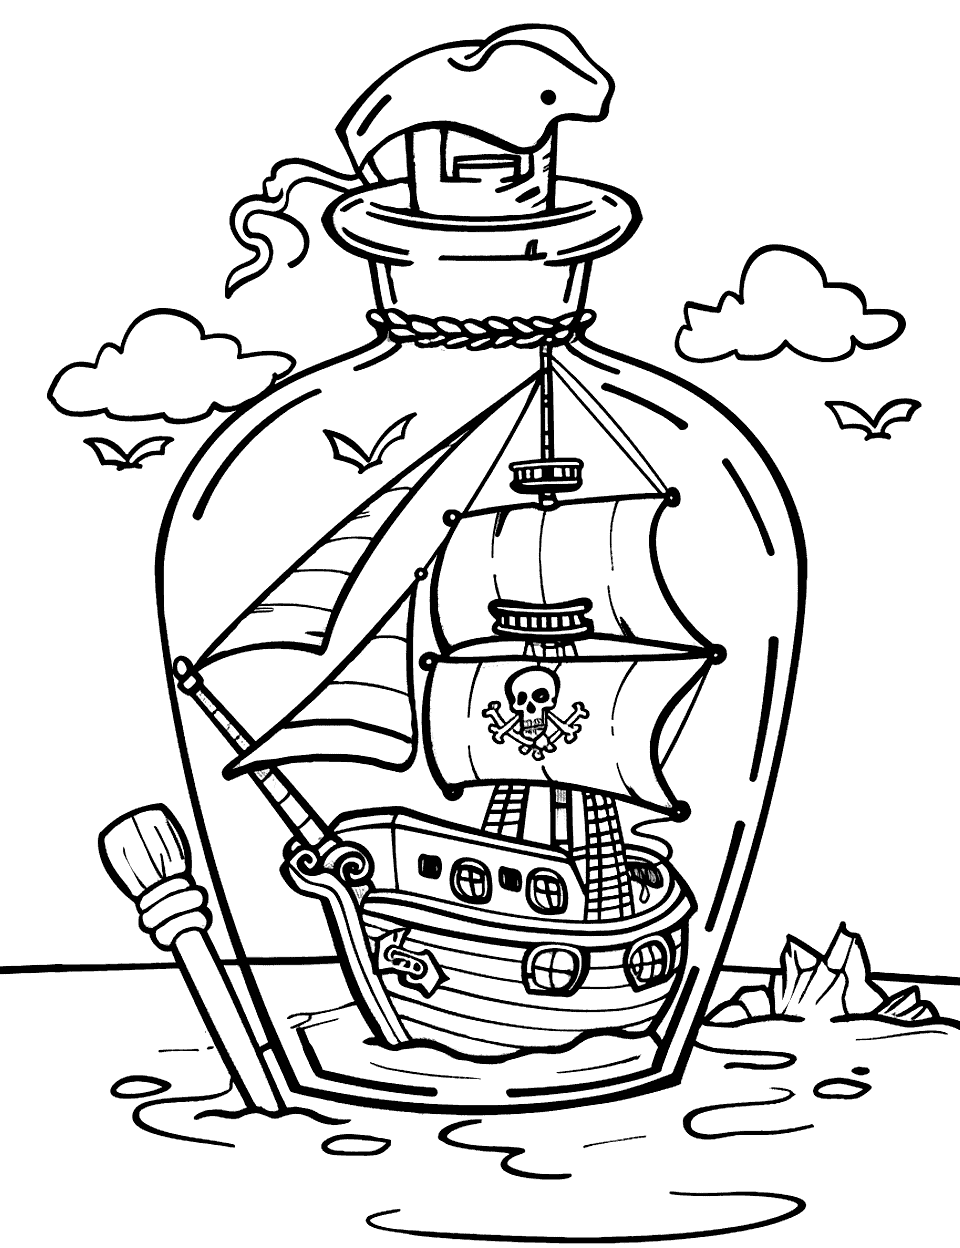 Pirate Ship in a Bottle Coloring Page - A magical scene of a tiny pirate ship inside a glass bottle.